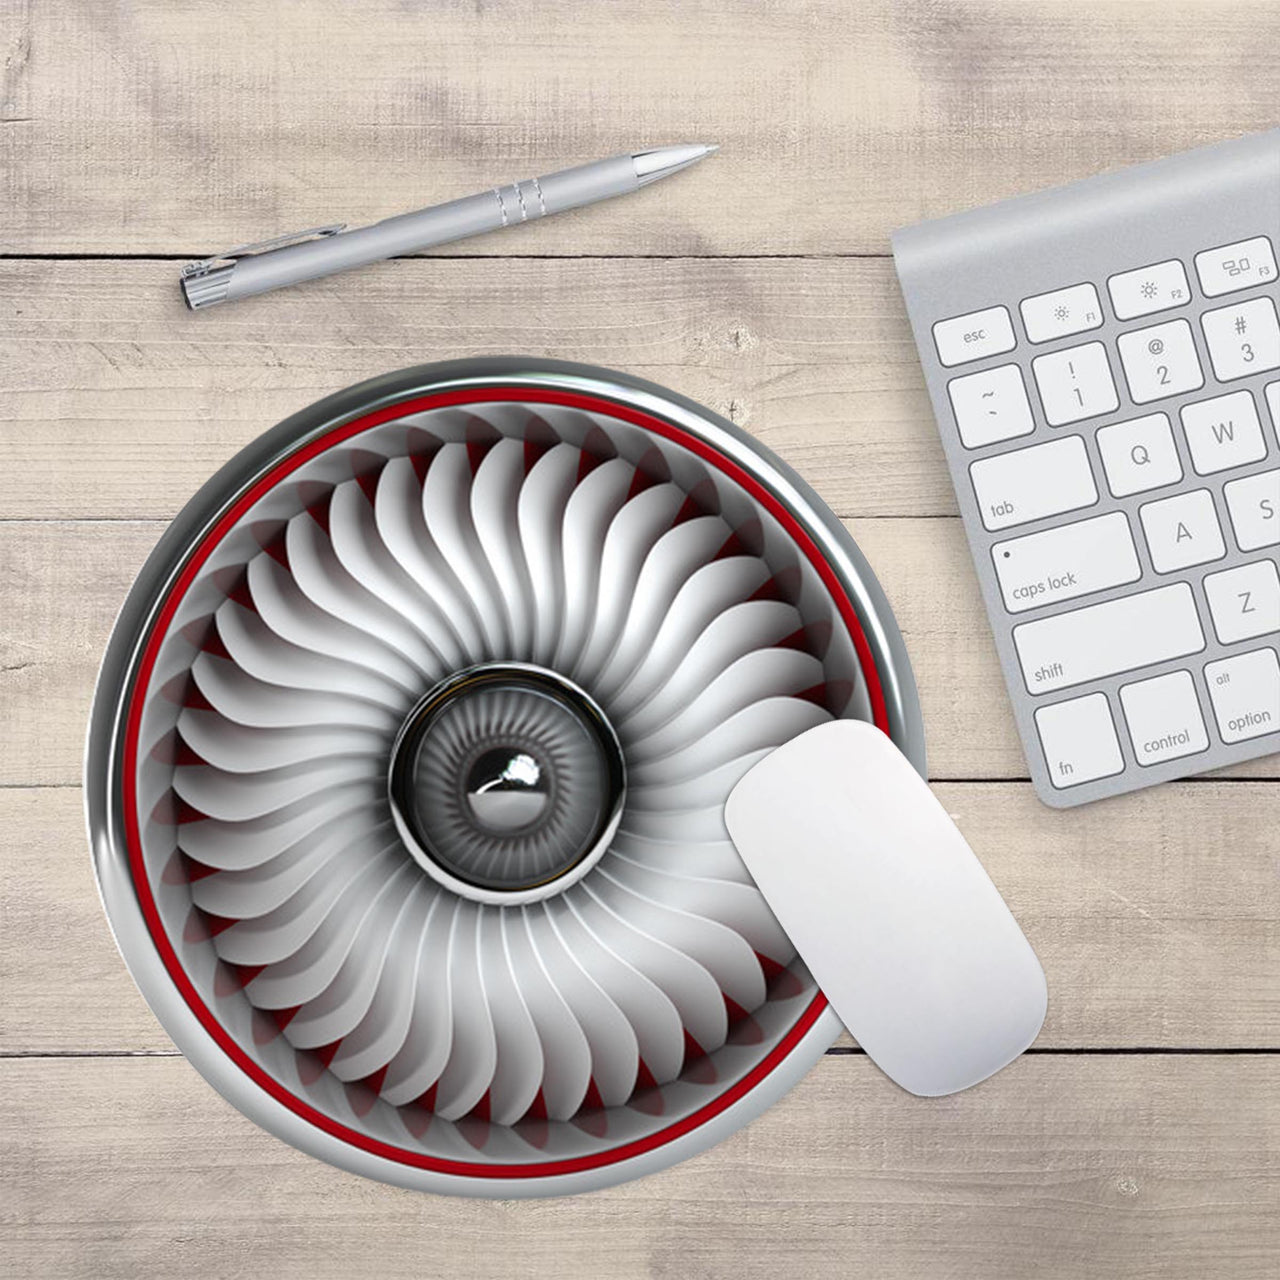 Graphical Jet Engine & Red Line Designed Mouse Pads